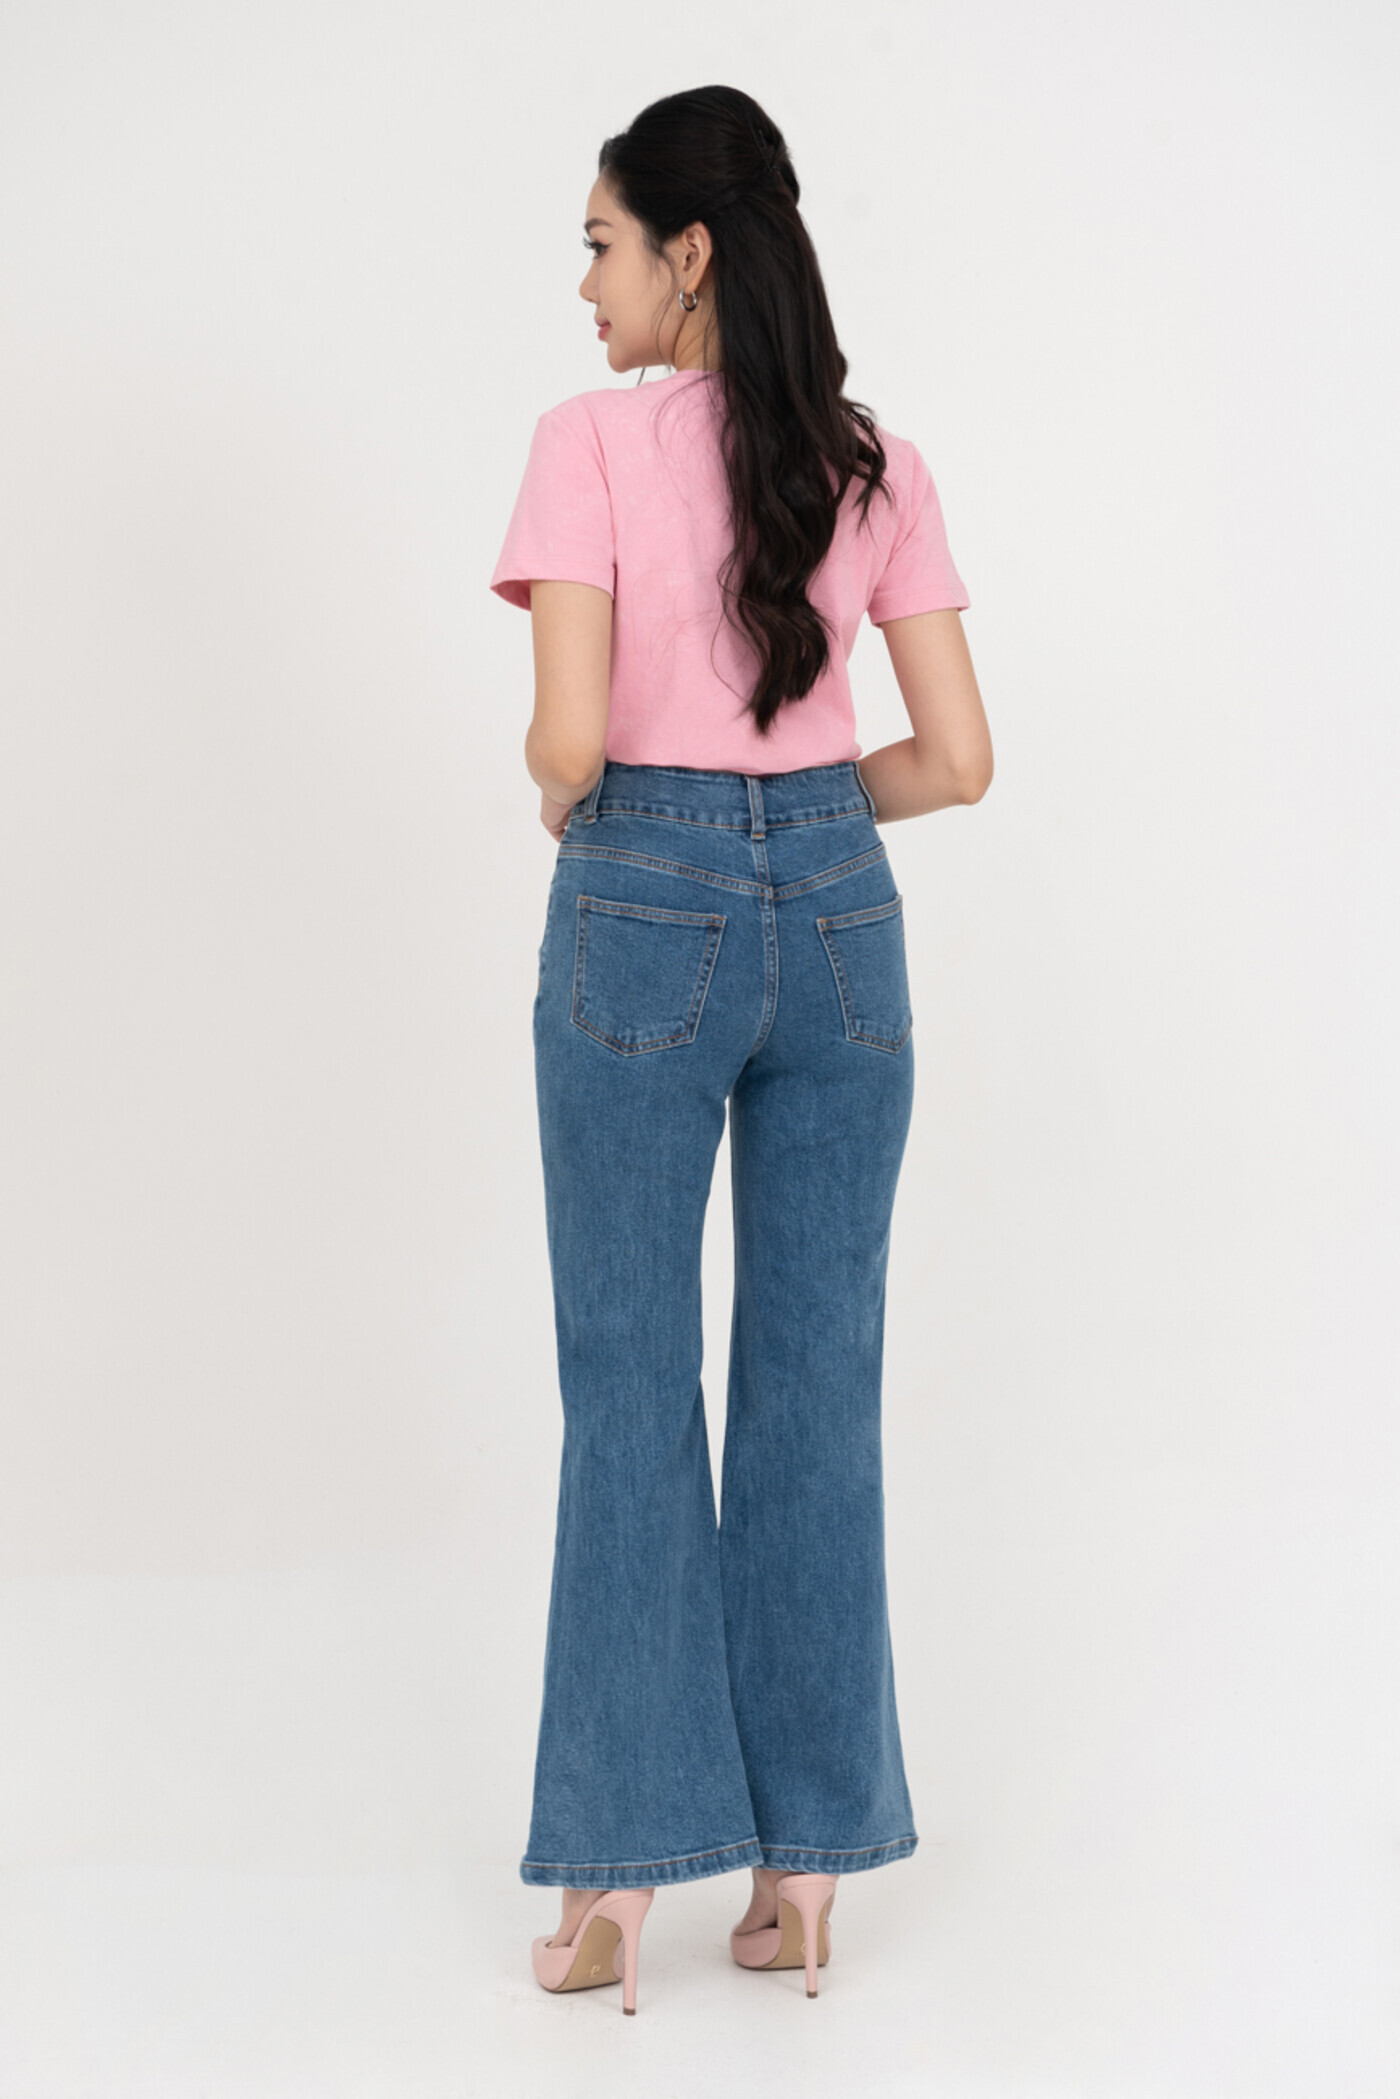 Quần jeans ống loe ly nổi 